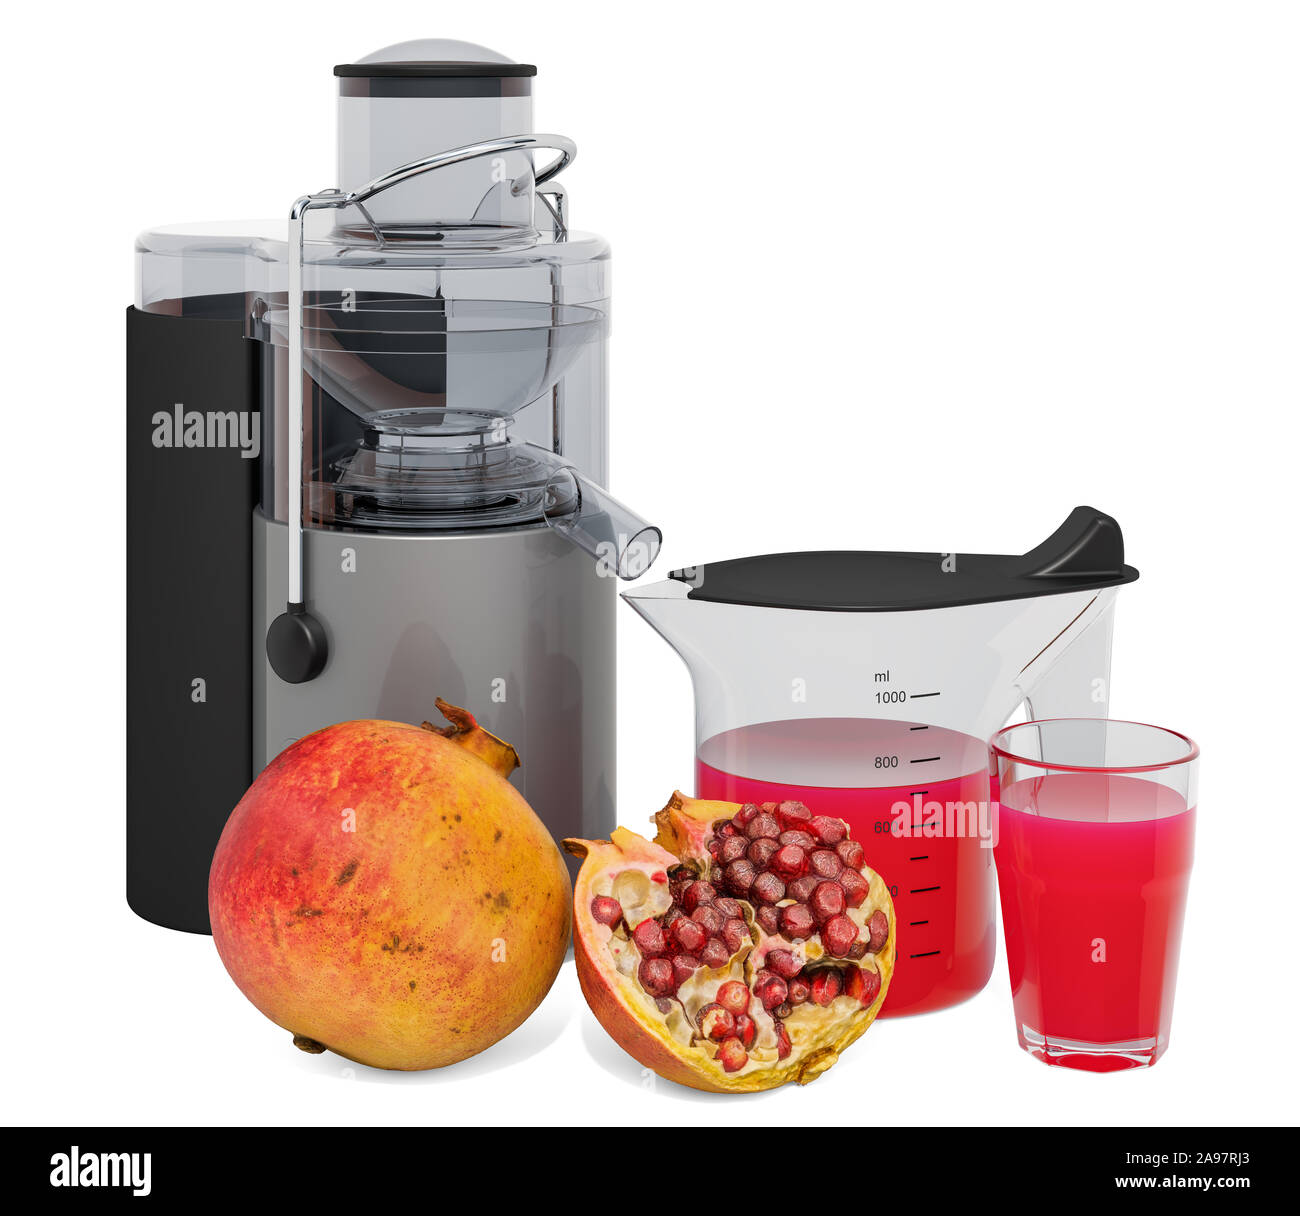 Juice extractor pomegranate Cut Out Stock Images & Pictures - Alamy